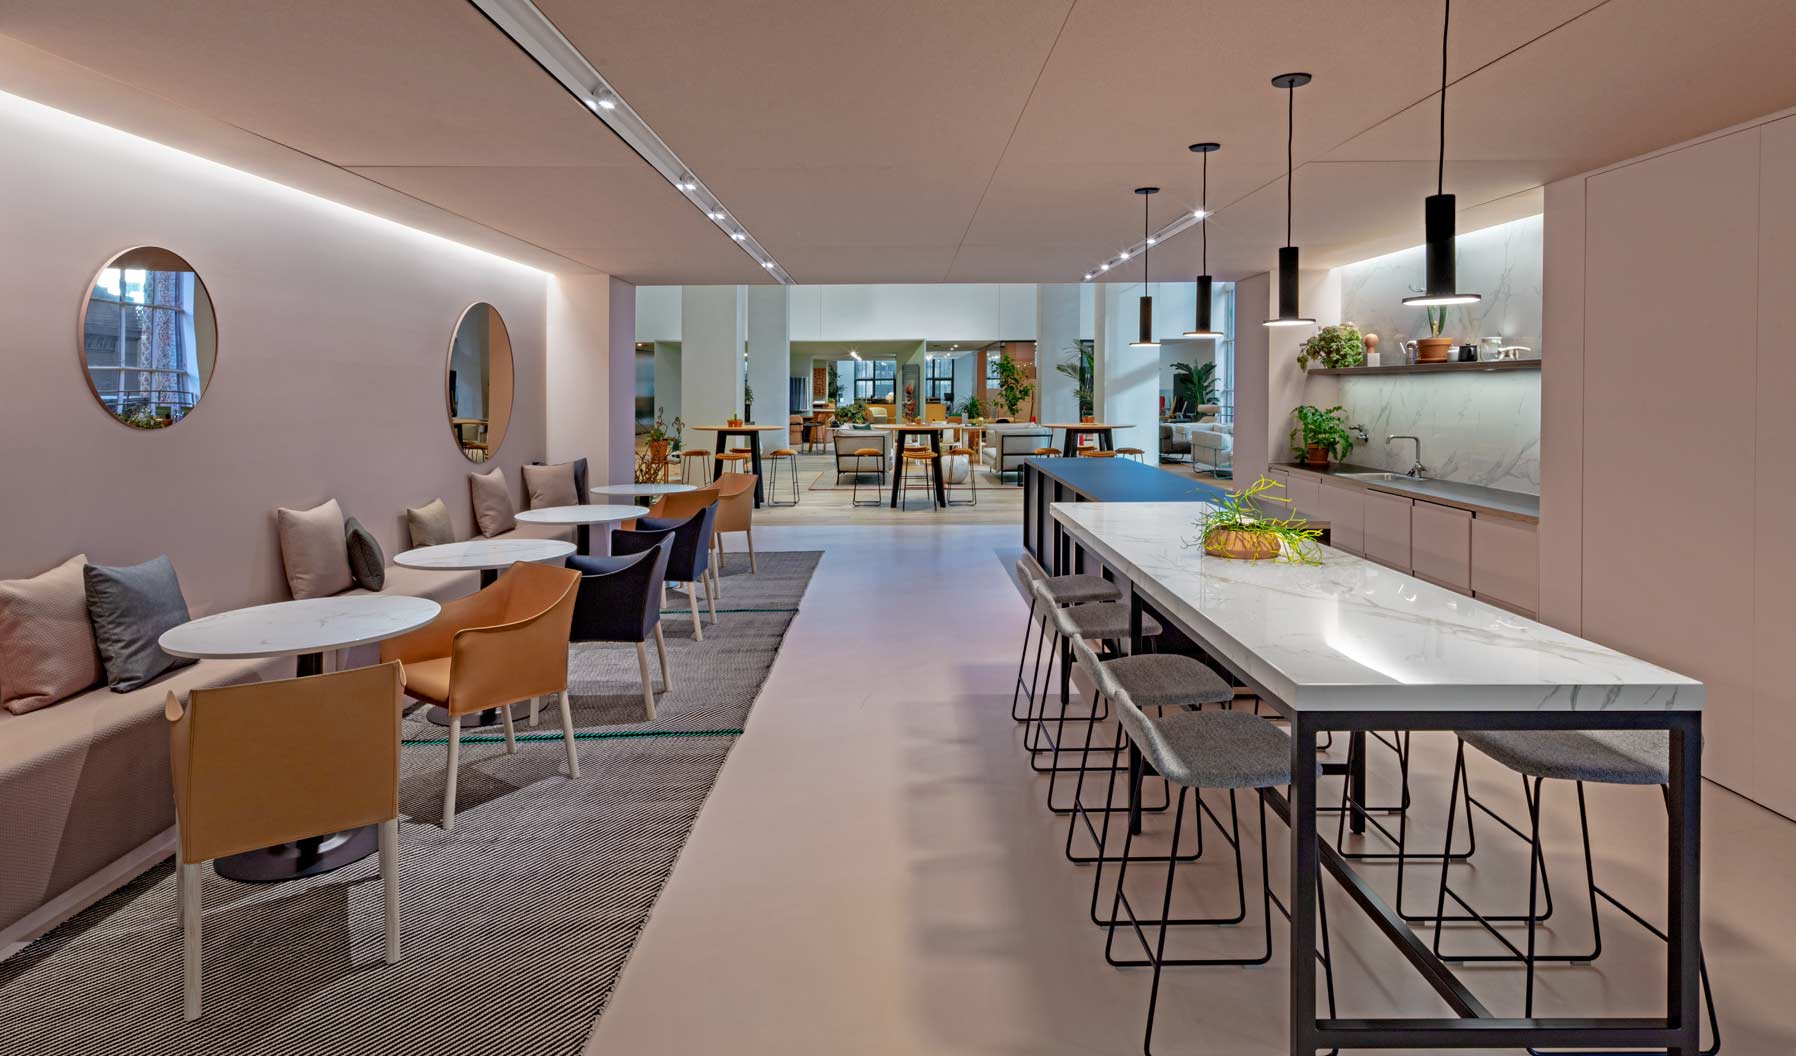 A multipurpose social hub with access to refreshments, the café encourage interaction and relaxation and connects the adjacent Community Social Space to individual workspaces.